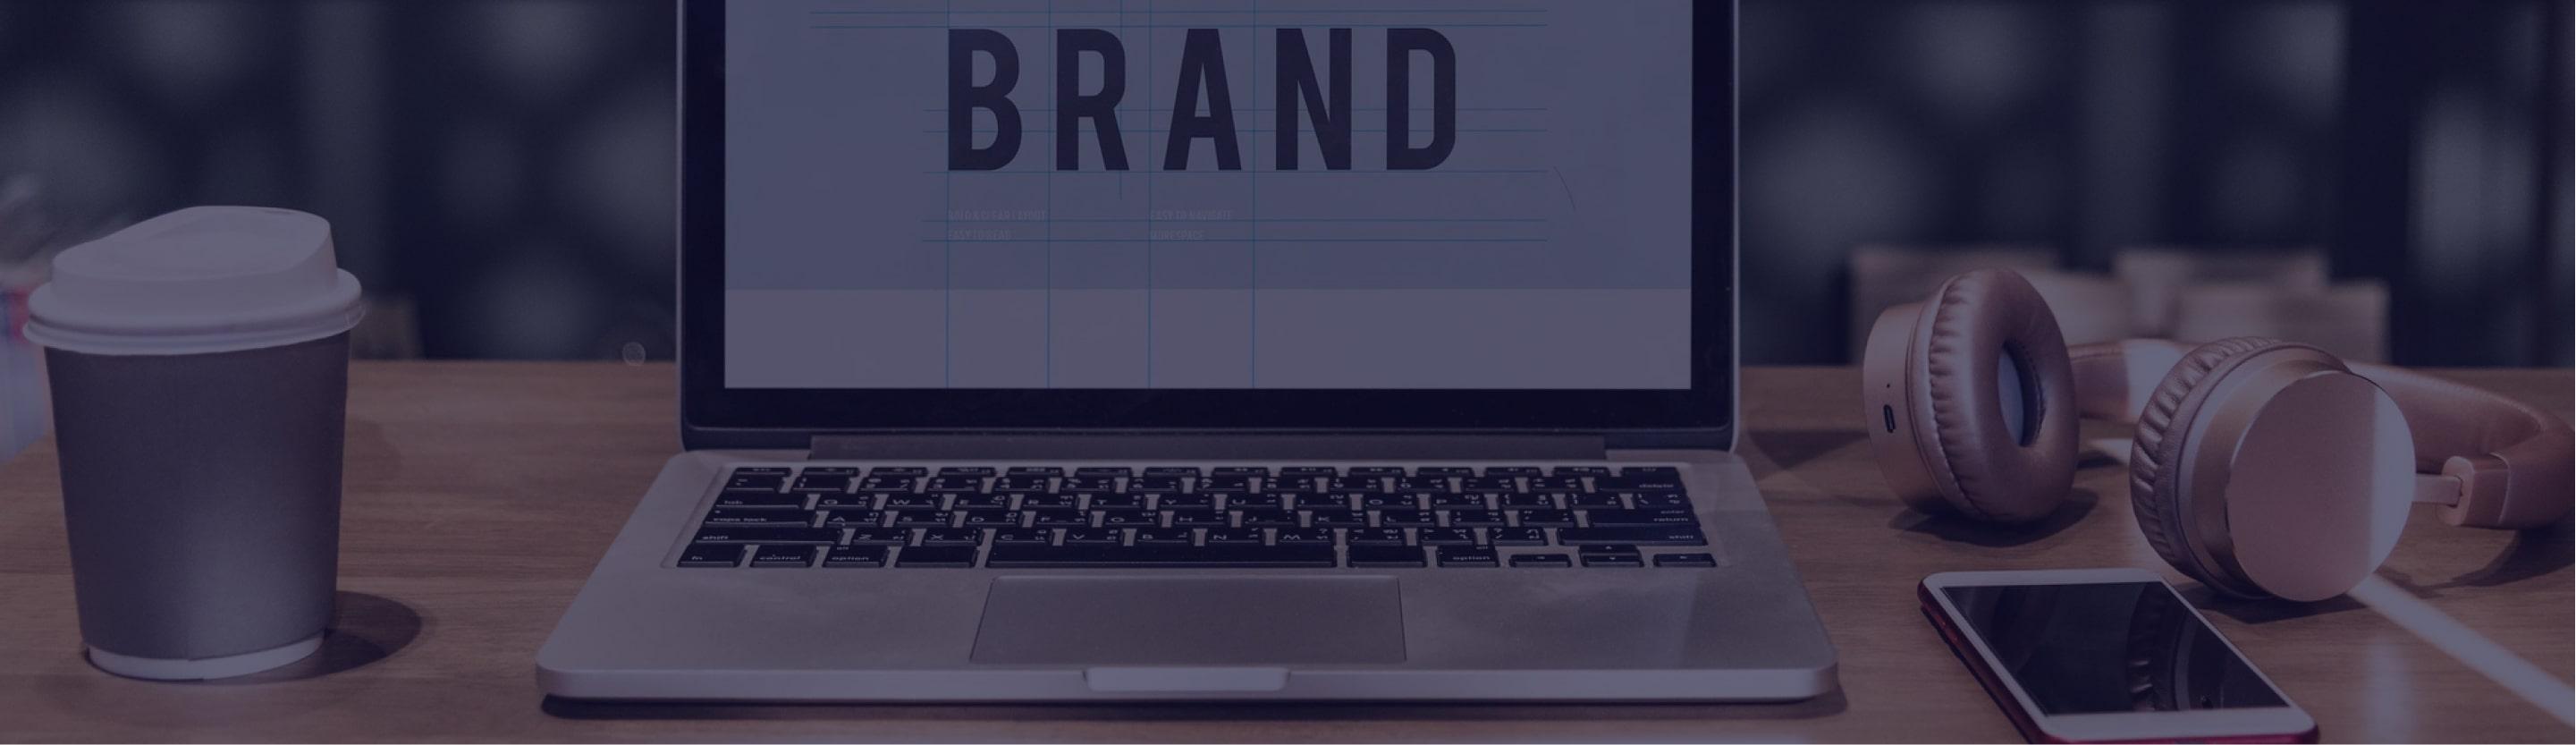 Why Distinctive Brand Assets Are Key to Brand Success